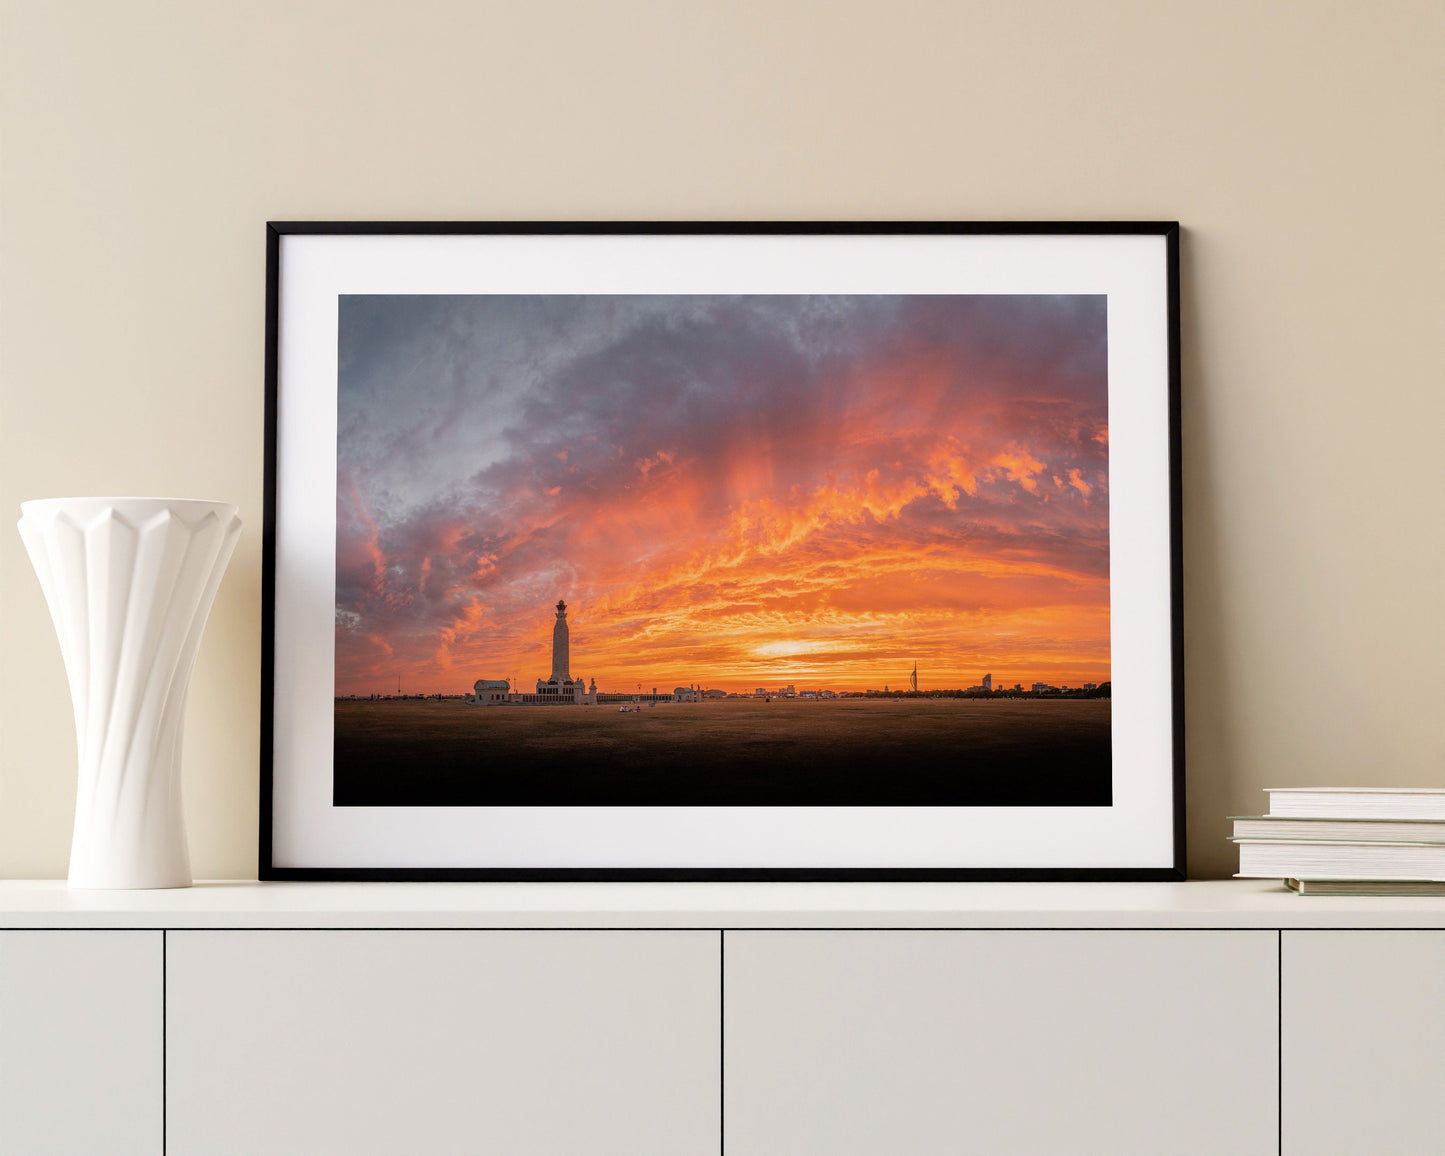 Southsea Common - Photography Print - Portsmouth and Southsea Prints - Wall Art -  Frame and Canvas Options - Landscape